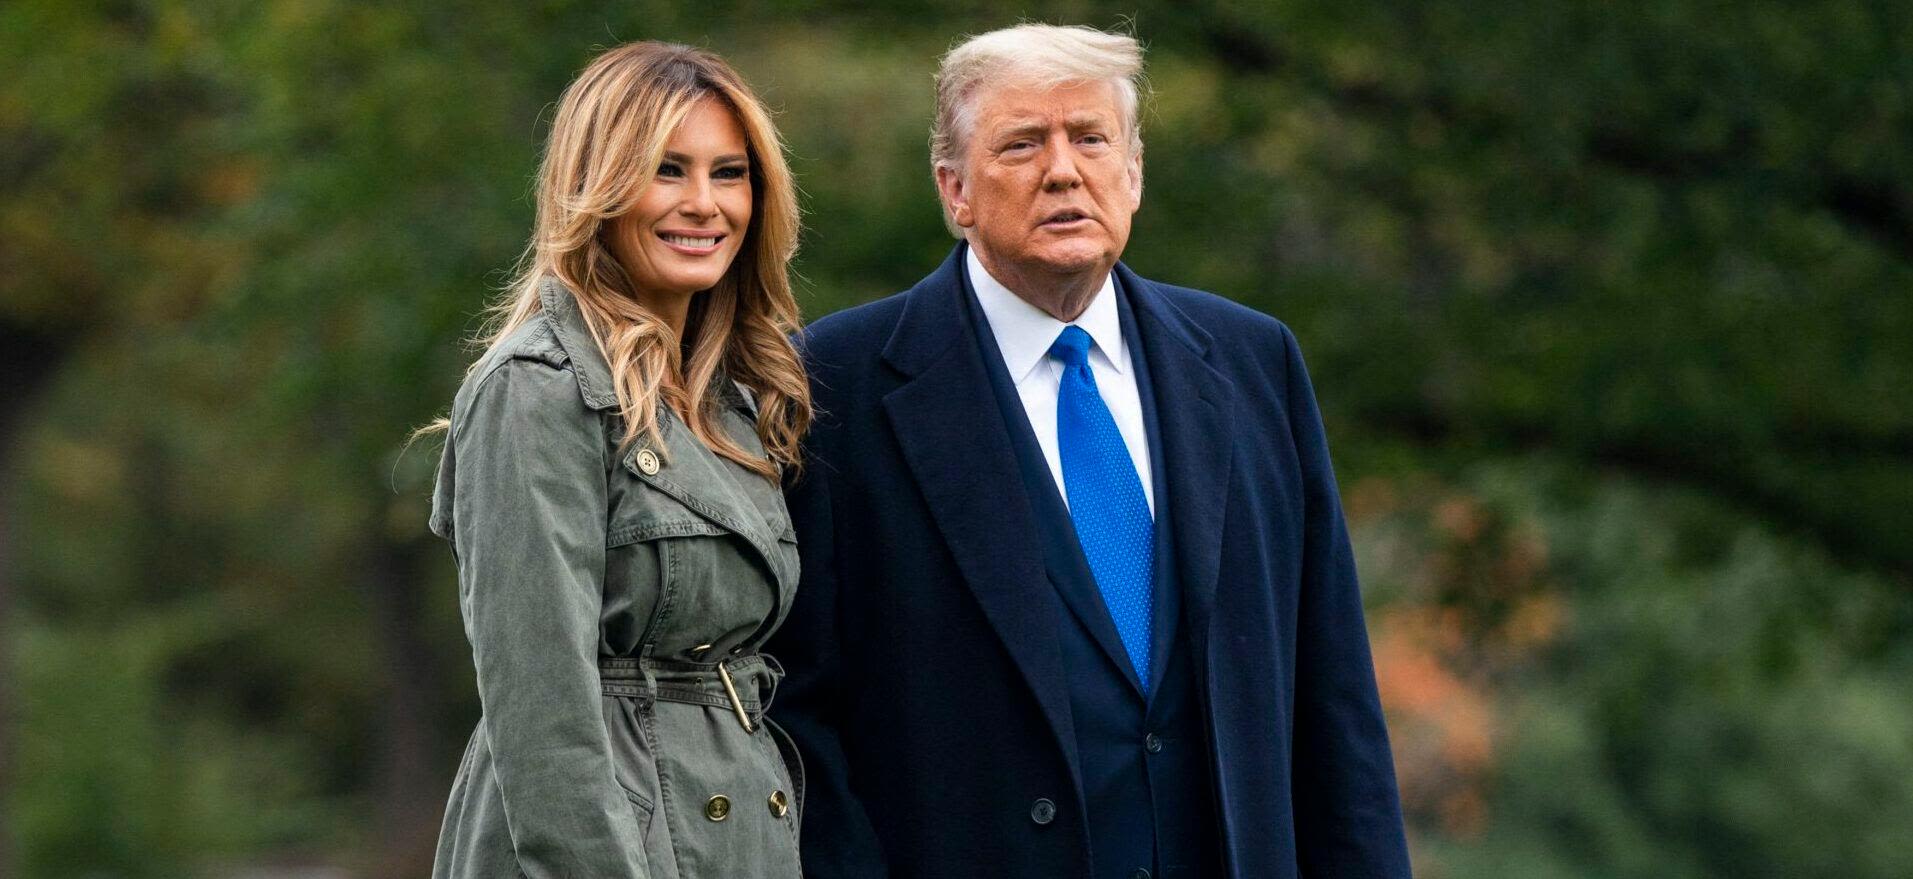 Donald Trump Reveals Wife Melania's Blunt Remark After He 'Struggled' To Exit A Stage At A Rally